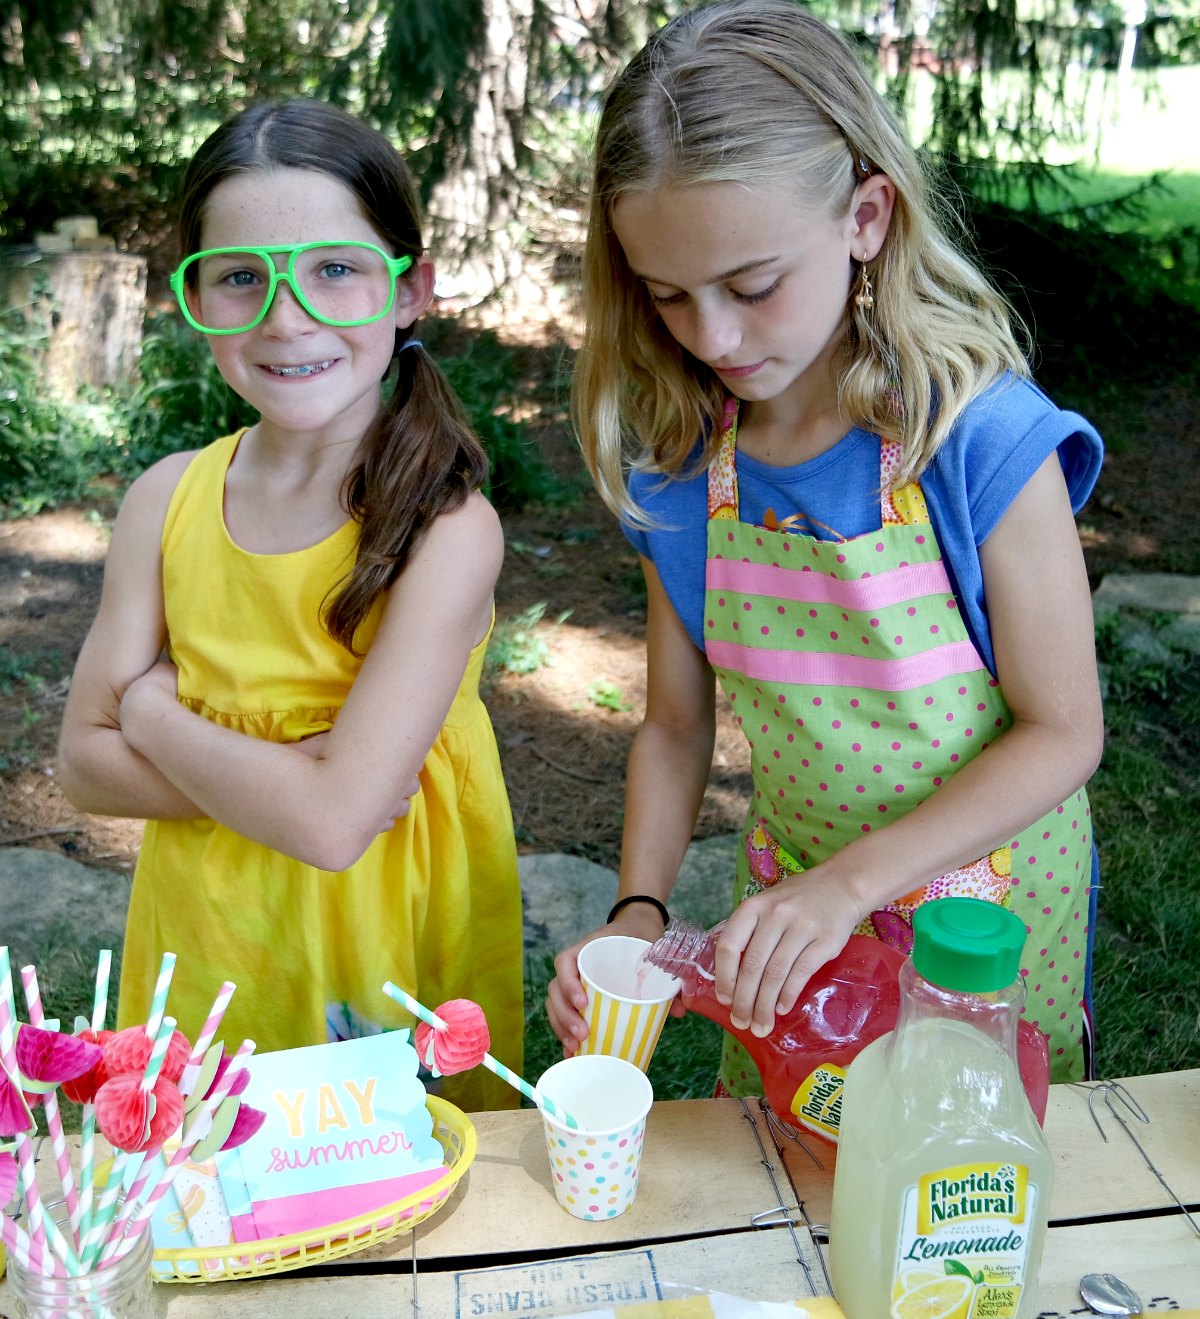 Thinking about hosting a lemonade stand with your kids? Be sure to read these tips first. These DIY ideas and recipes will turn your lemonade stand into a party every time - while making it as easy as possible! #FloridasNatural #ad #summer #lemonadestand #kids